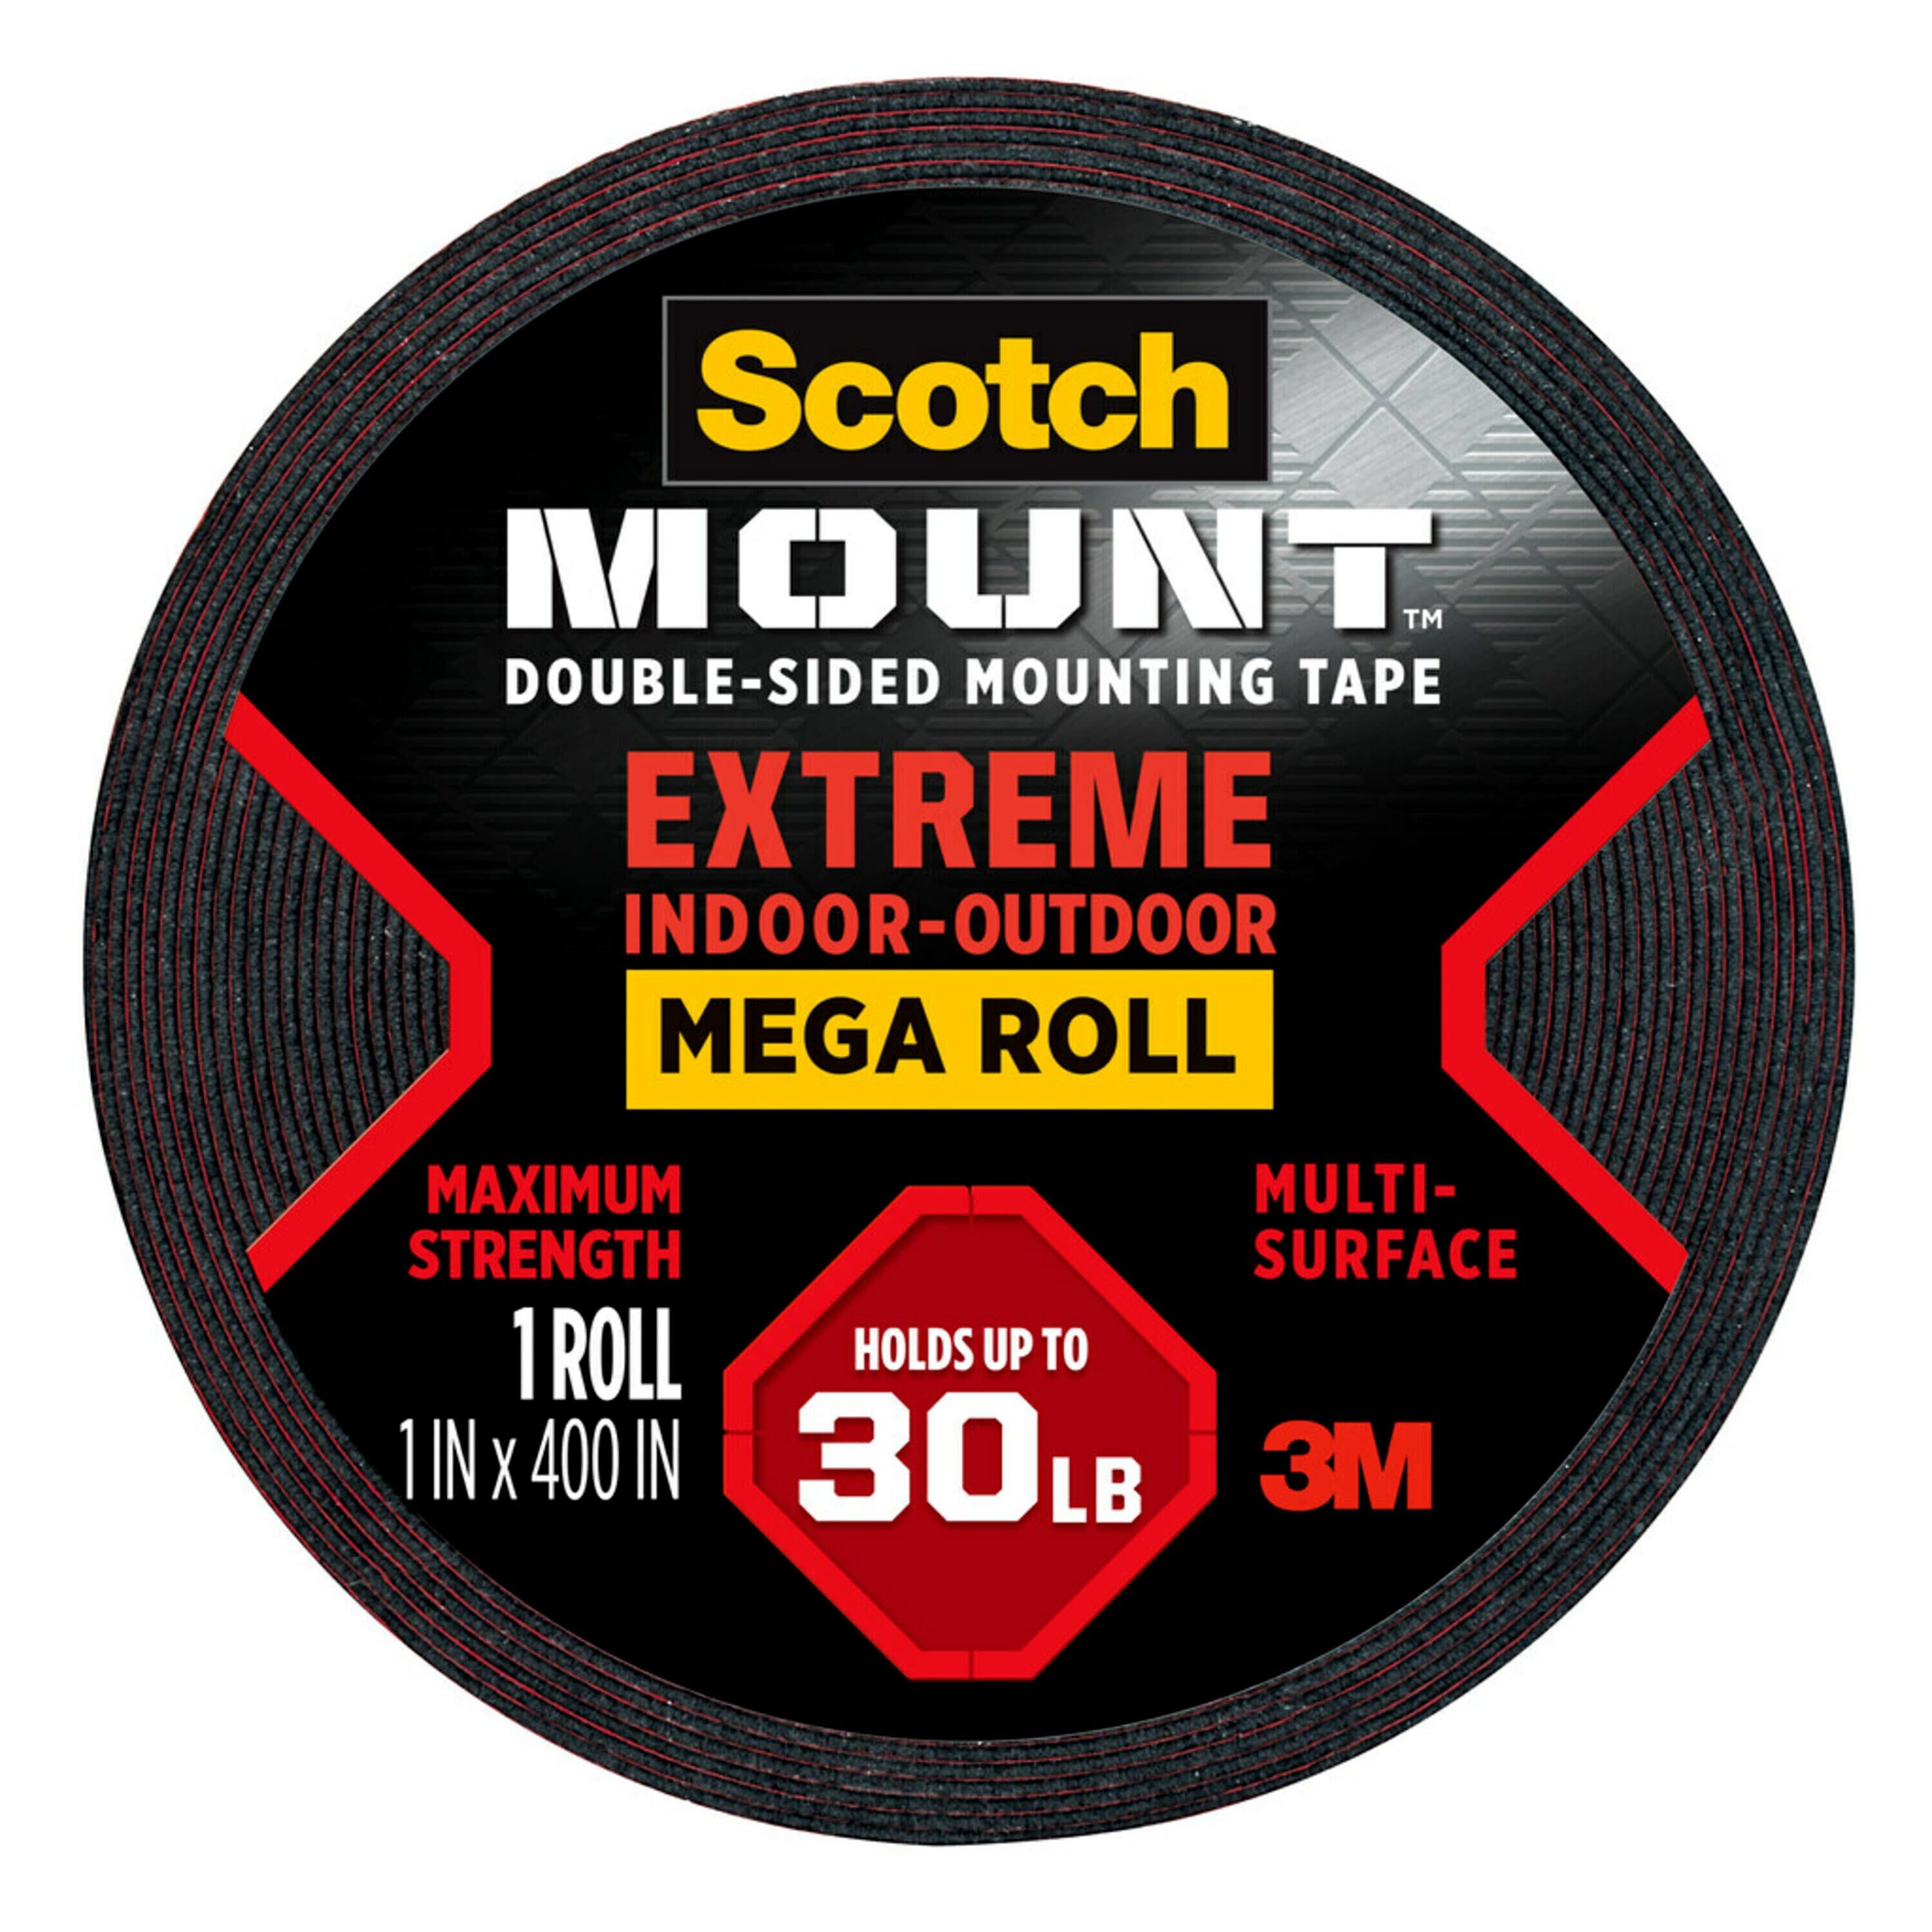 Scotch-Mount Clear Double-Sided Mounting Tape 1-in x 10.41-ft Double-Sided  Tape